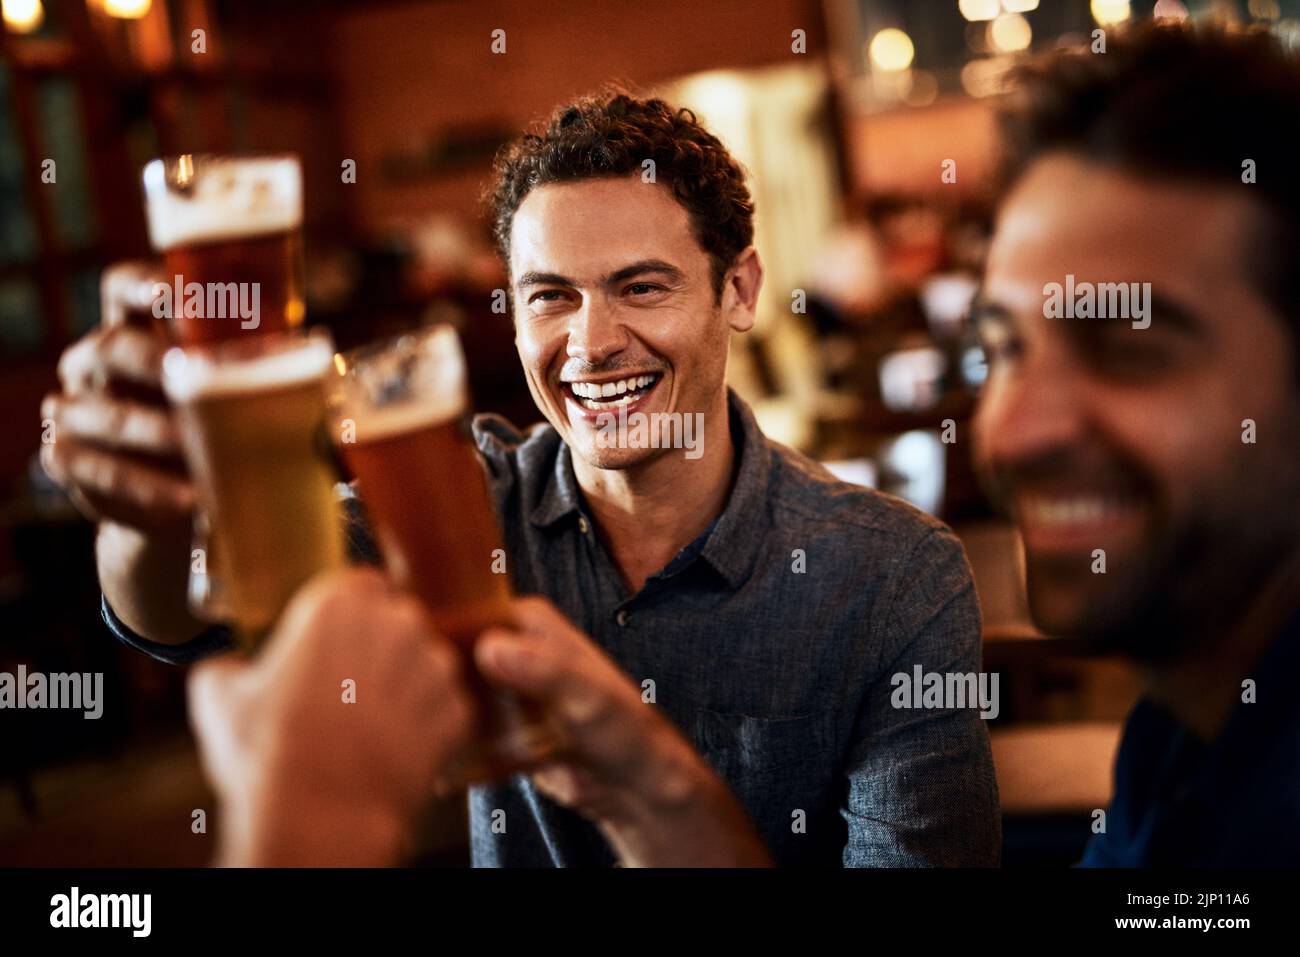 Whos buying the next set of beers. a group of young friends seated at a table together while enjoying a beer and celebrating with a celebratory toast Stock Photo